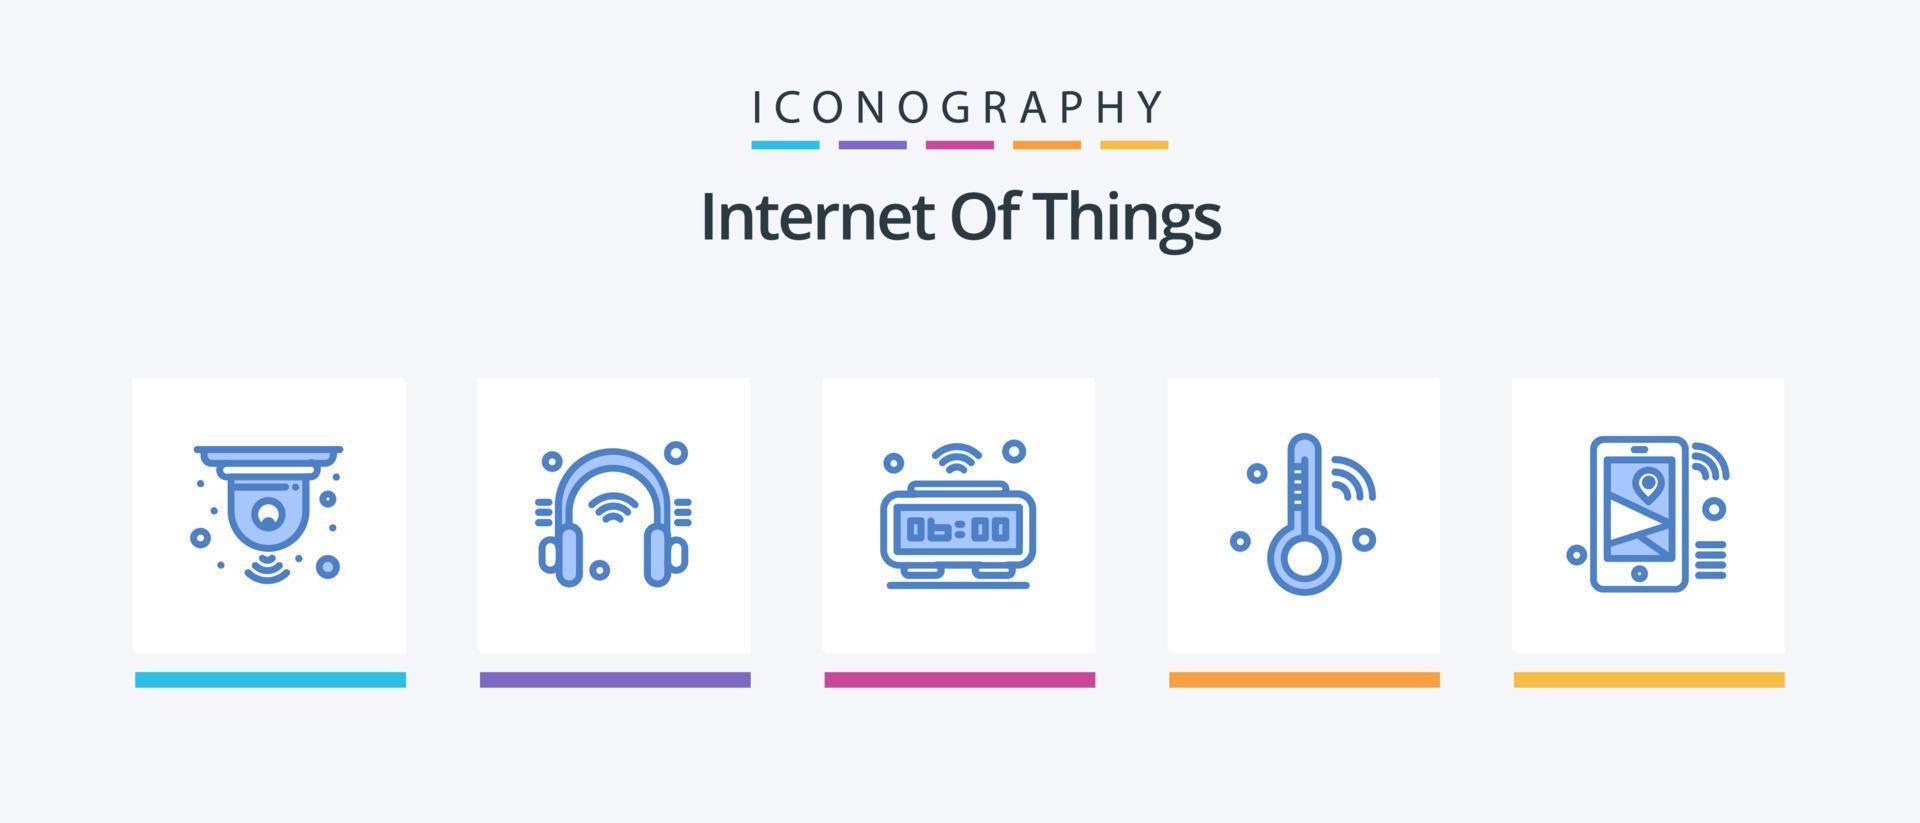 Internet Of Things Blue 5 Icon Pack Including internet. temperature. alarm. iot. wifi. Creative Icons Design vector